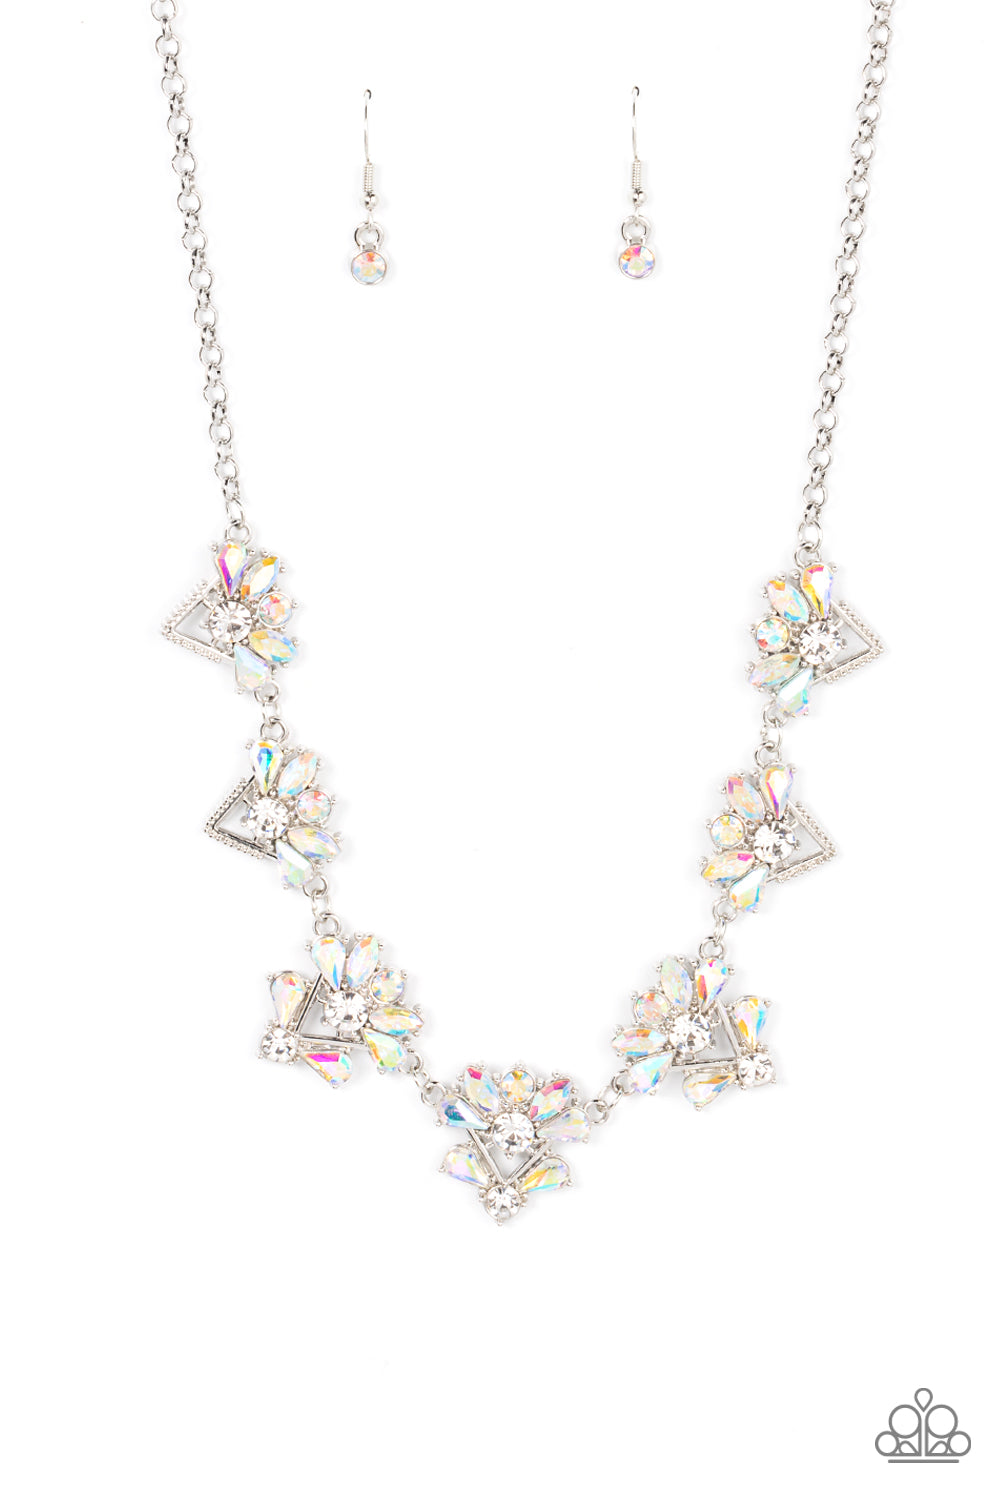 Paparazzi Accessories Extragalactic Extravagance - Multi Necklace & Earrings